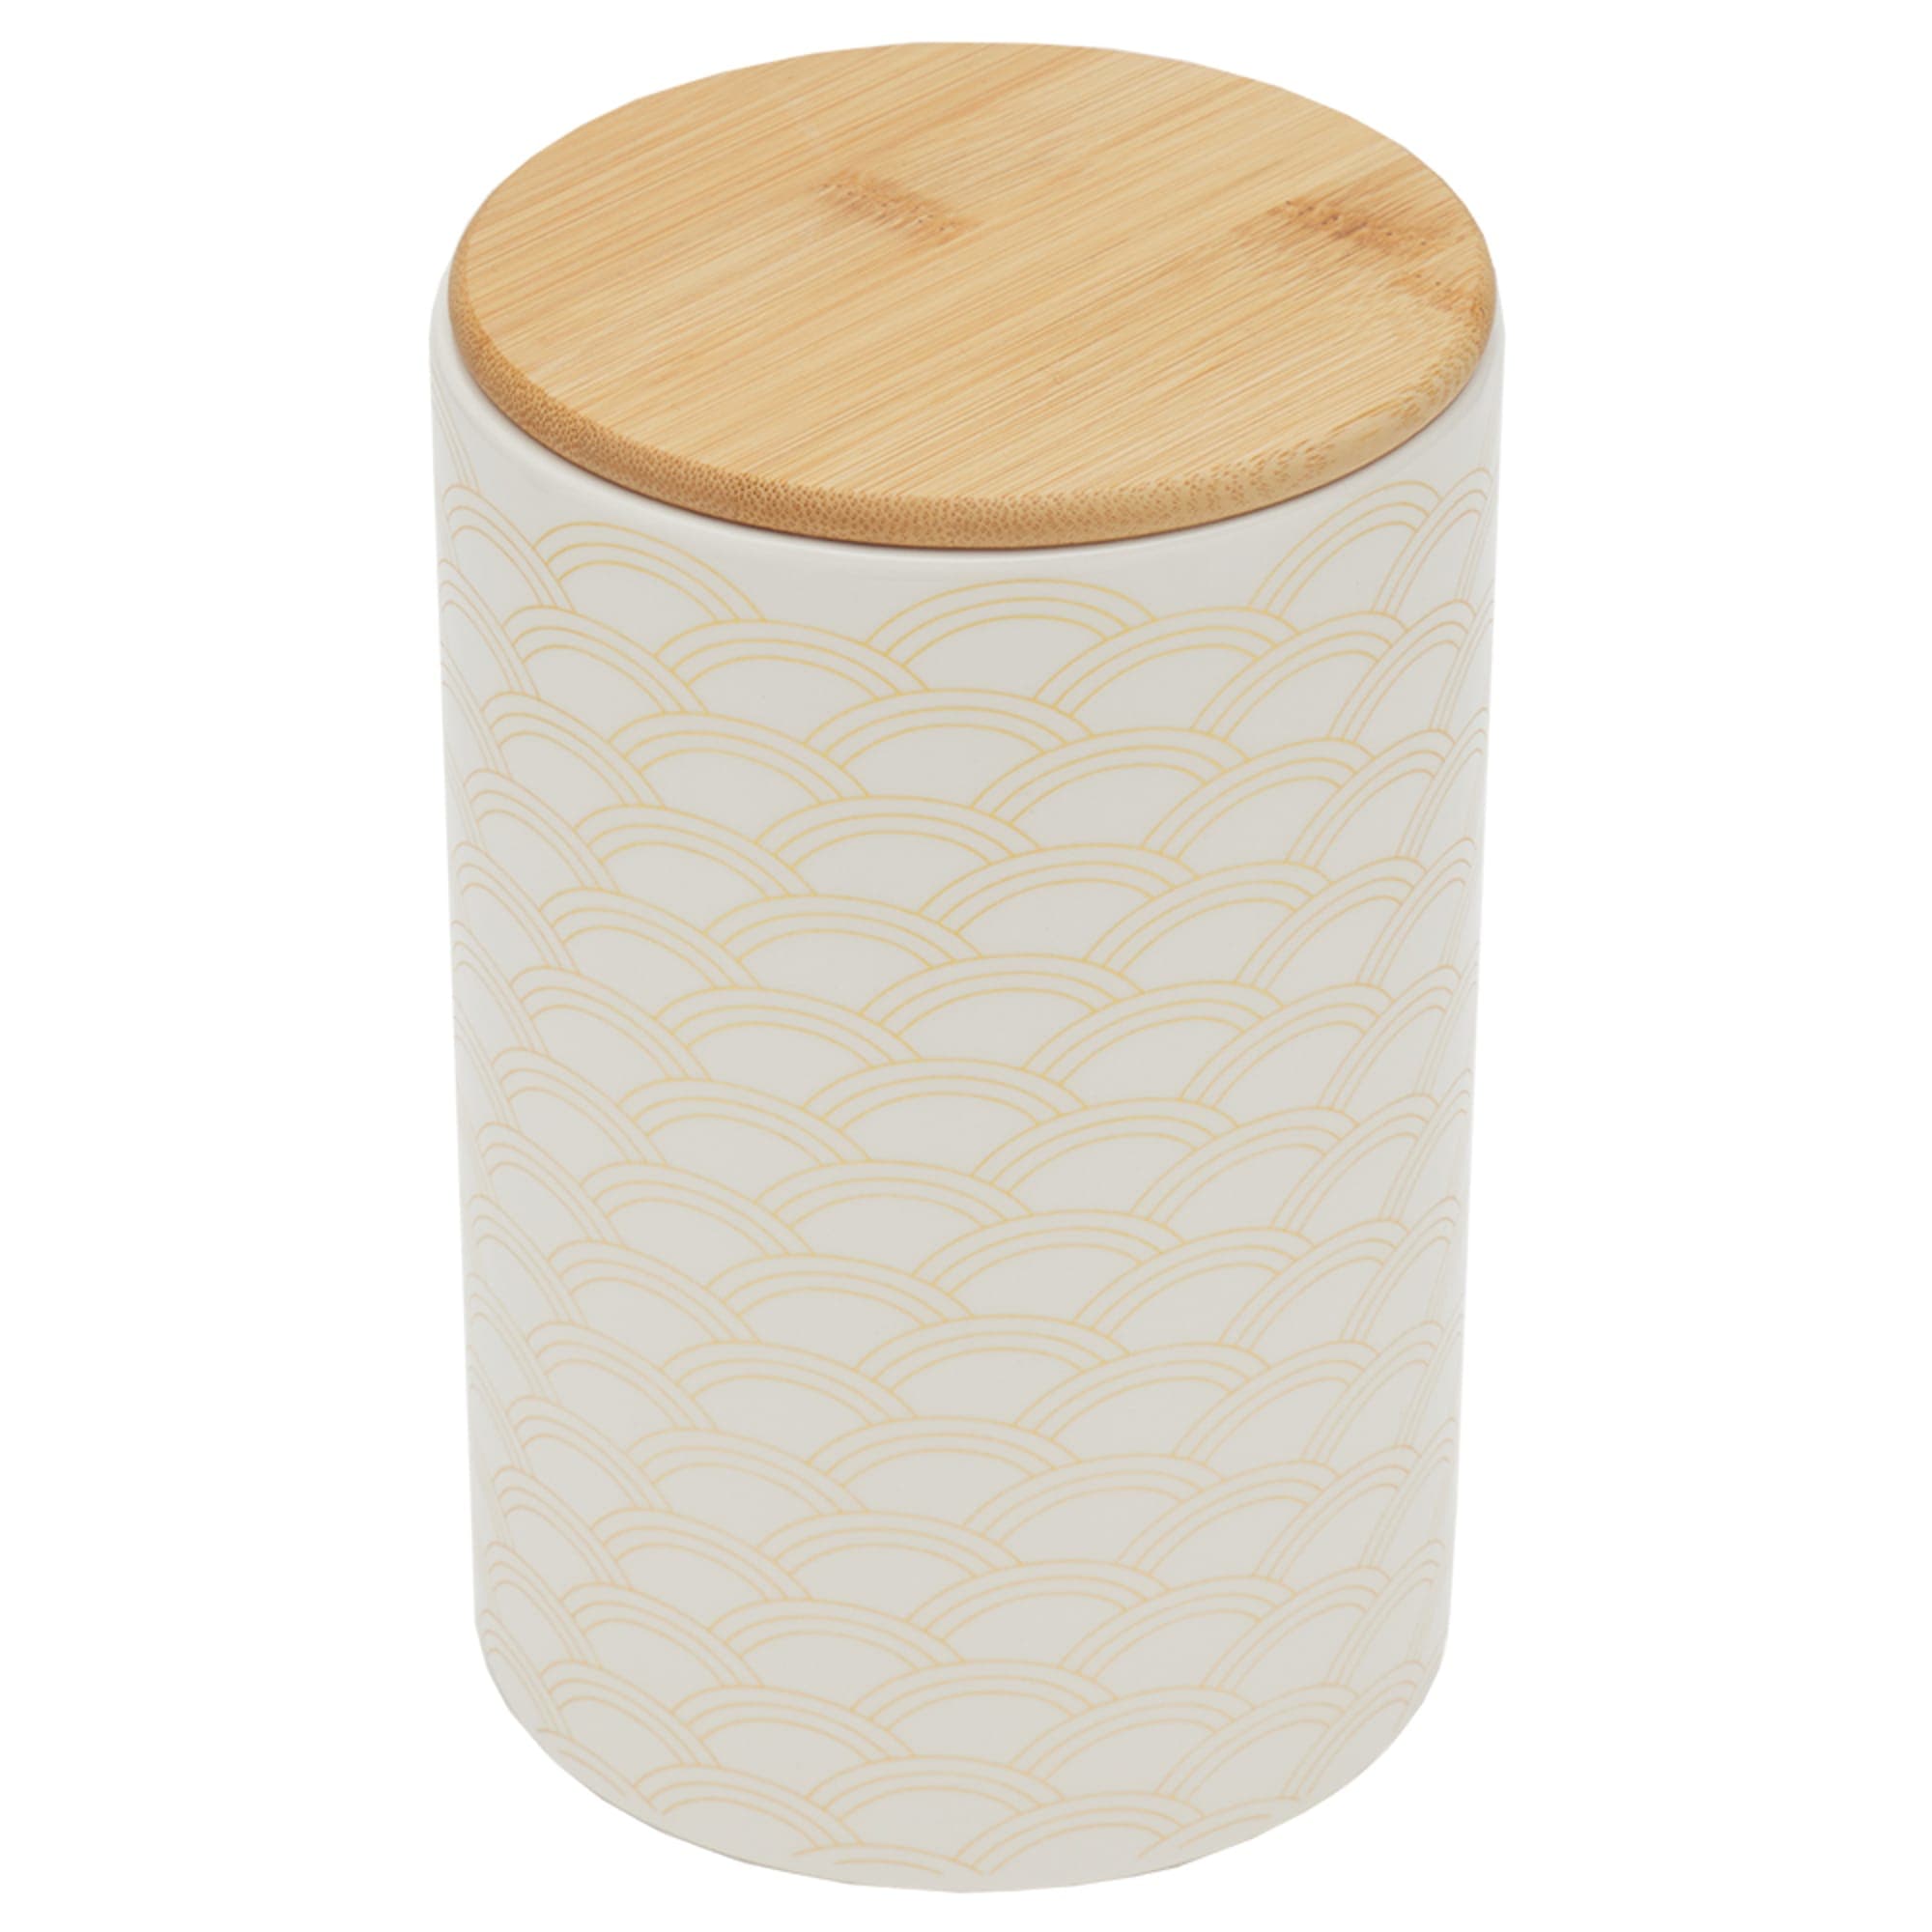 Home Basics Scallop Large Ceramic Canister with Bamboo Top $7.00 EACH, CASE PACK OF 12